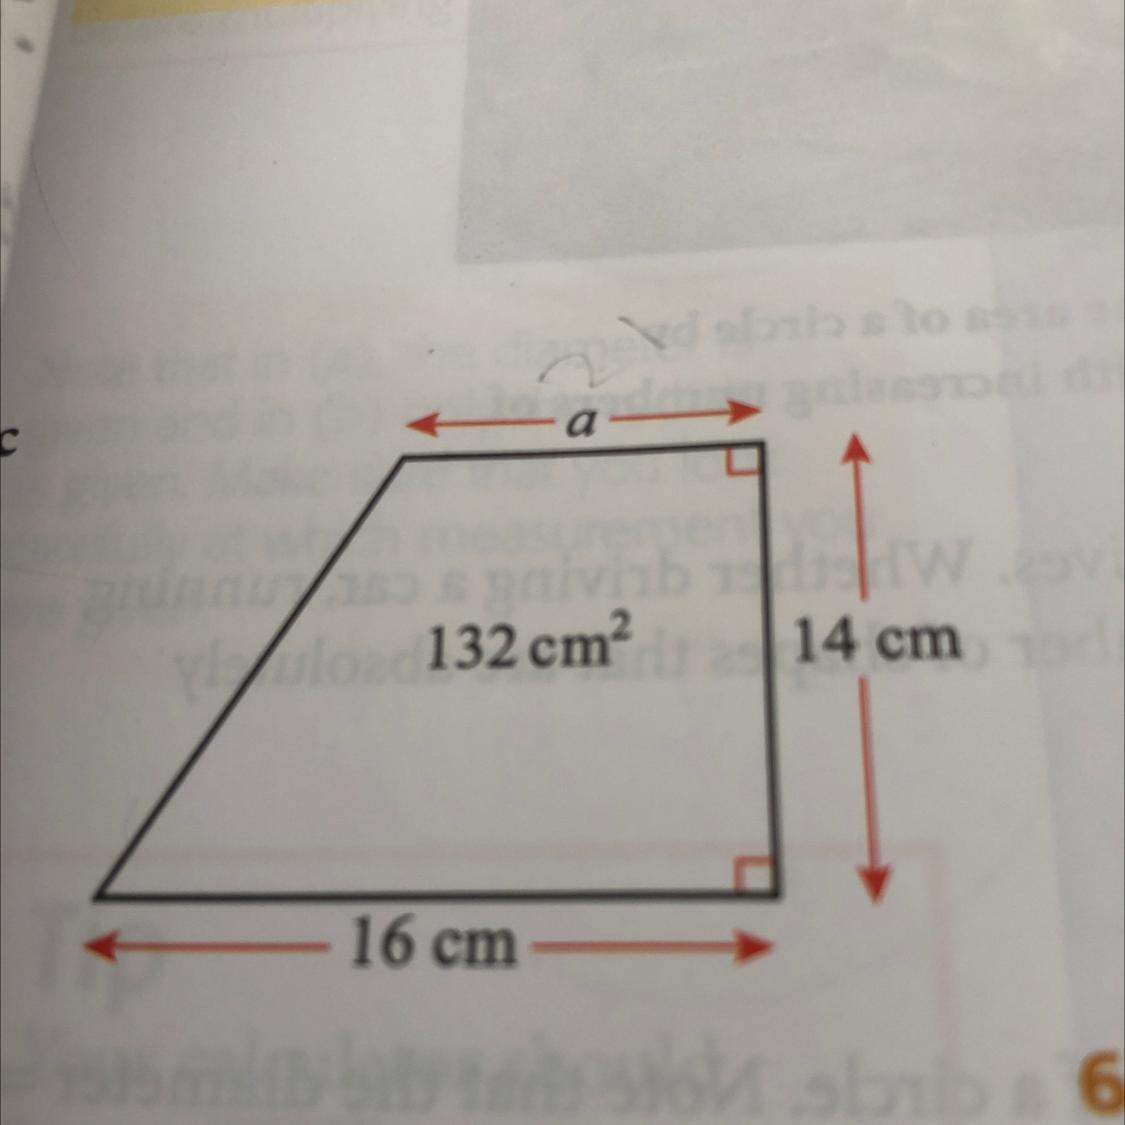 The Area Of A Trapezium Is 132 Cm. Its Height Is 14 Cm The Larger Parallel Side Is Longer Than The Other